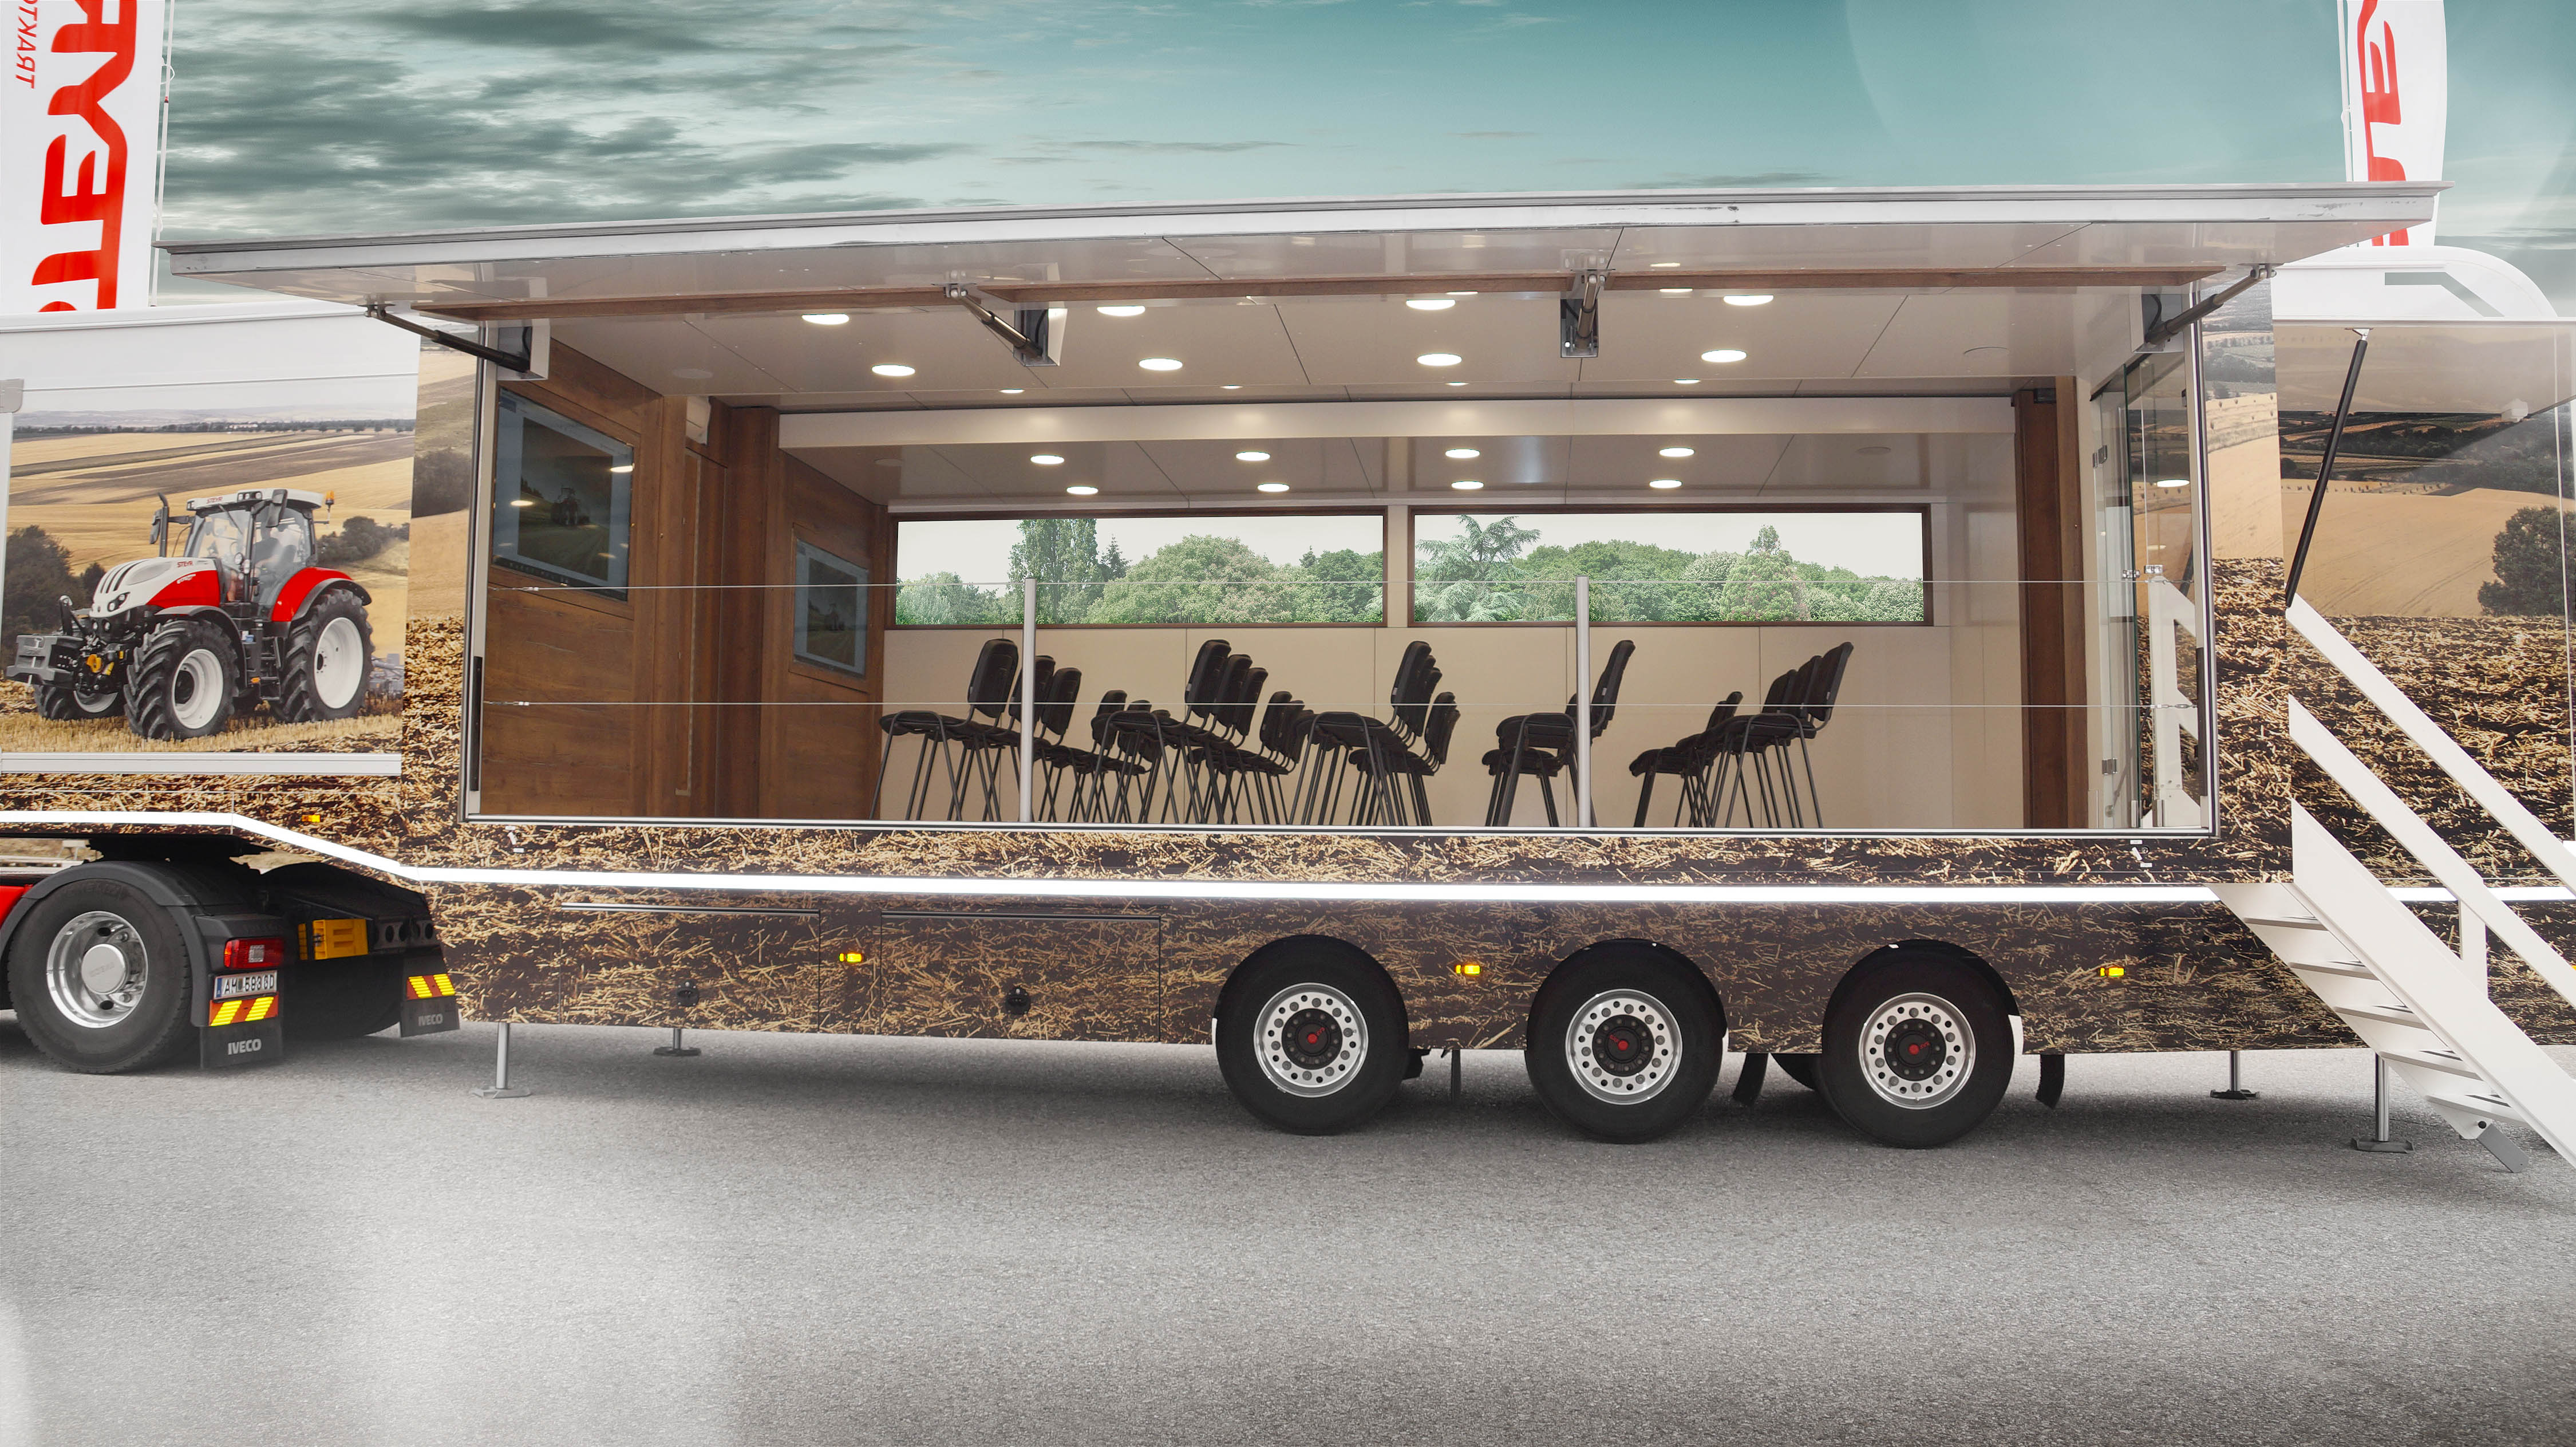 STEYR Demo Truck - trailer inside <br> Image source: CNH Industrial Corporate Communications